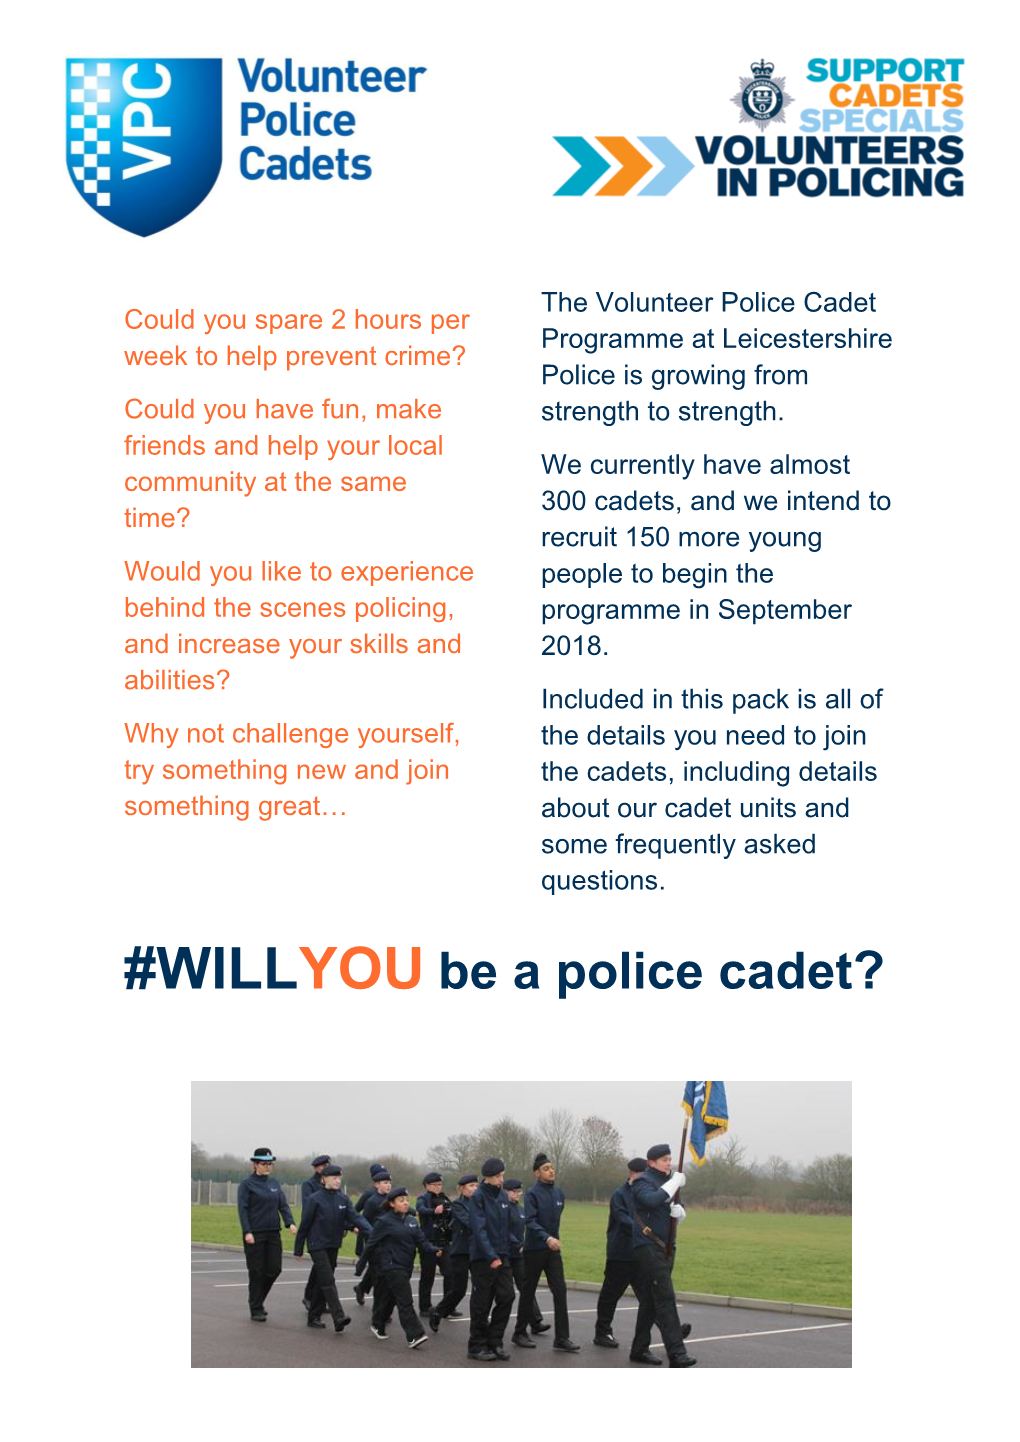 WILLYOU Be a Police Cadet?